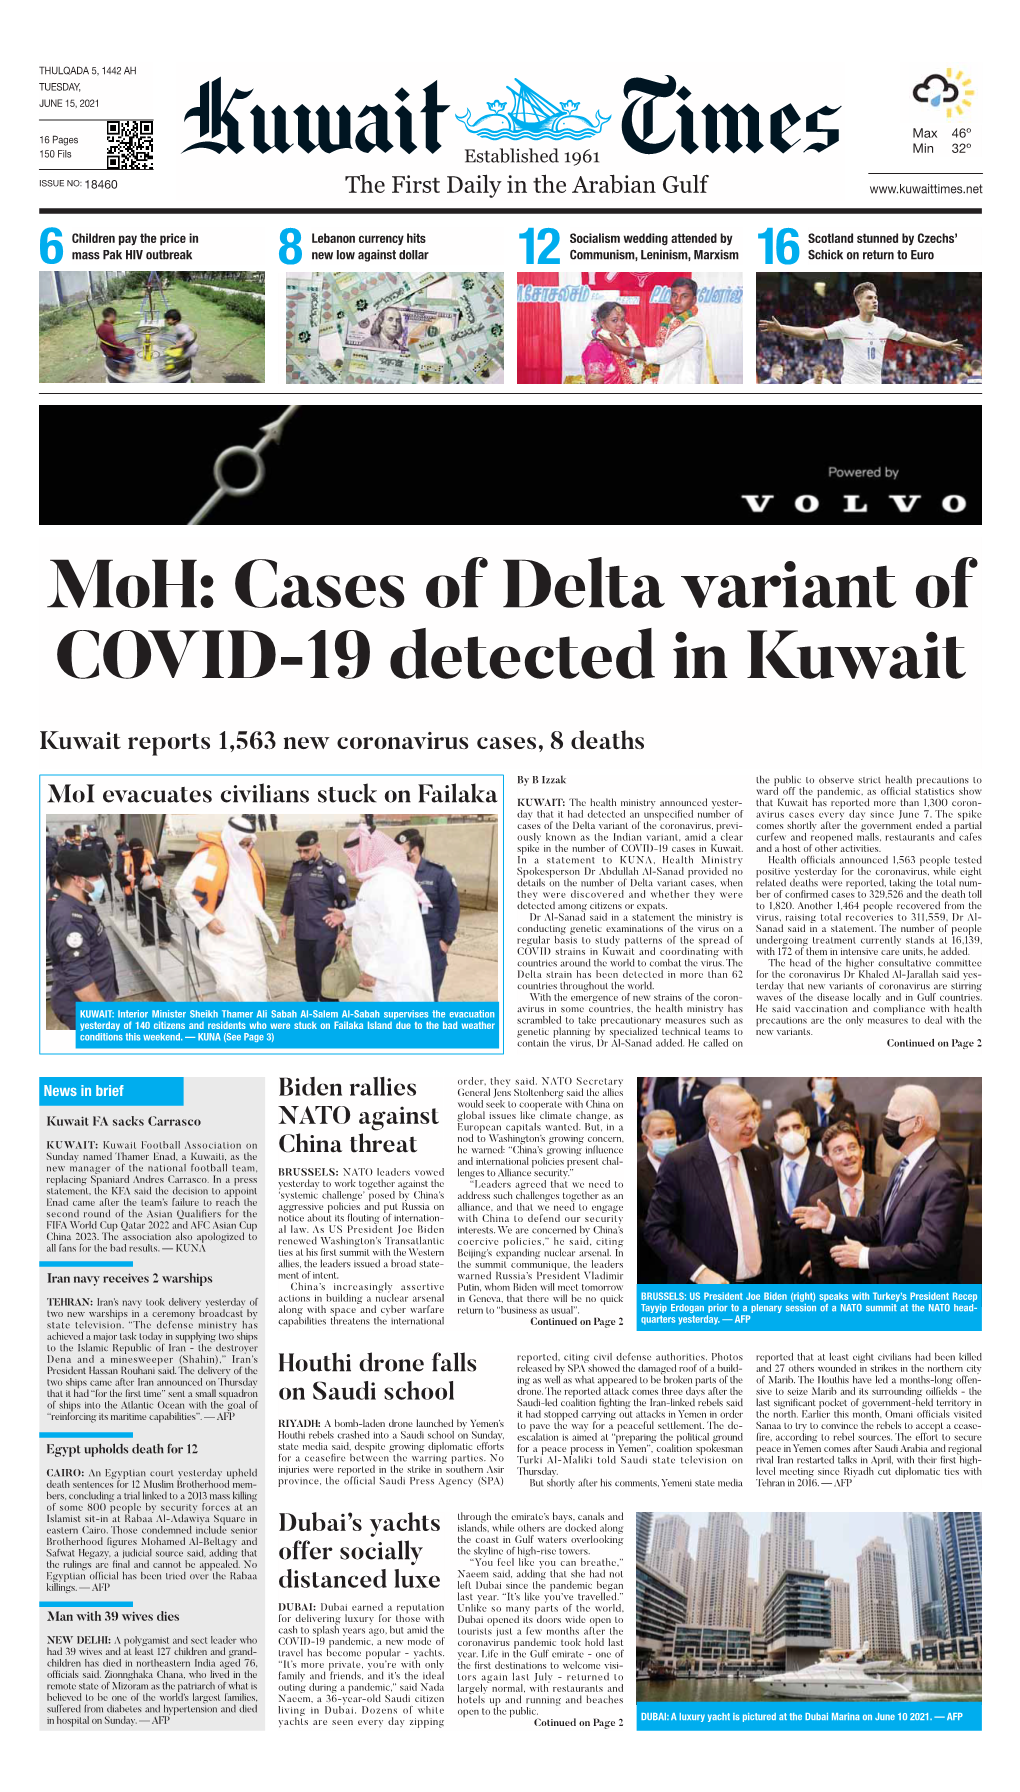 Cases of Delta Variant of COVID-19 Detected in Kuwait